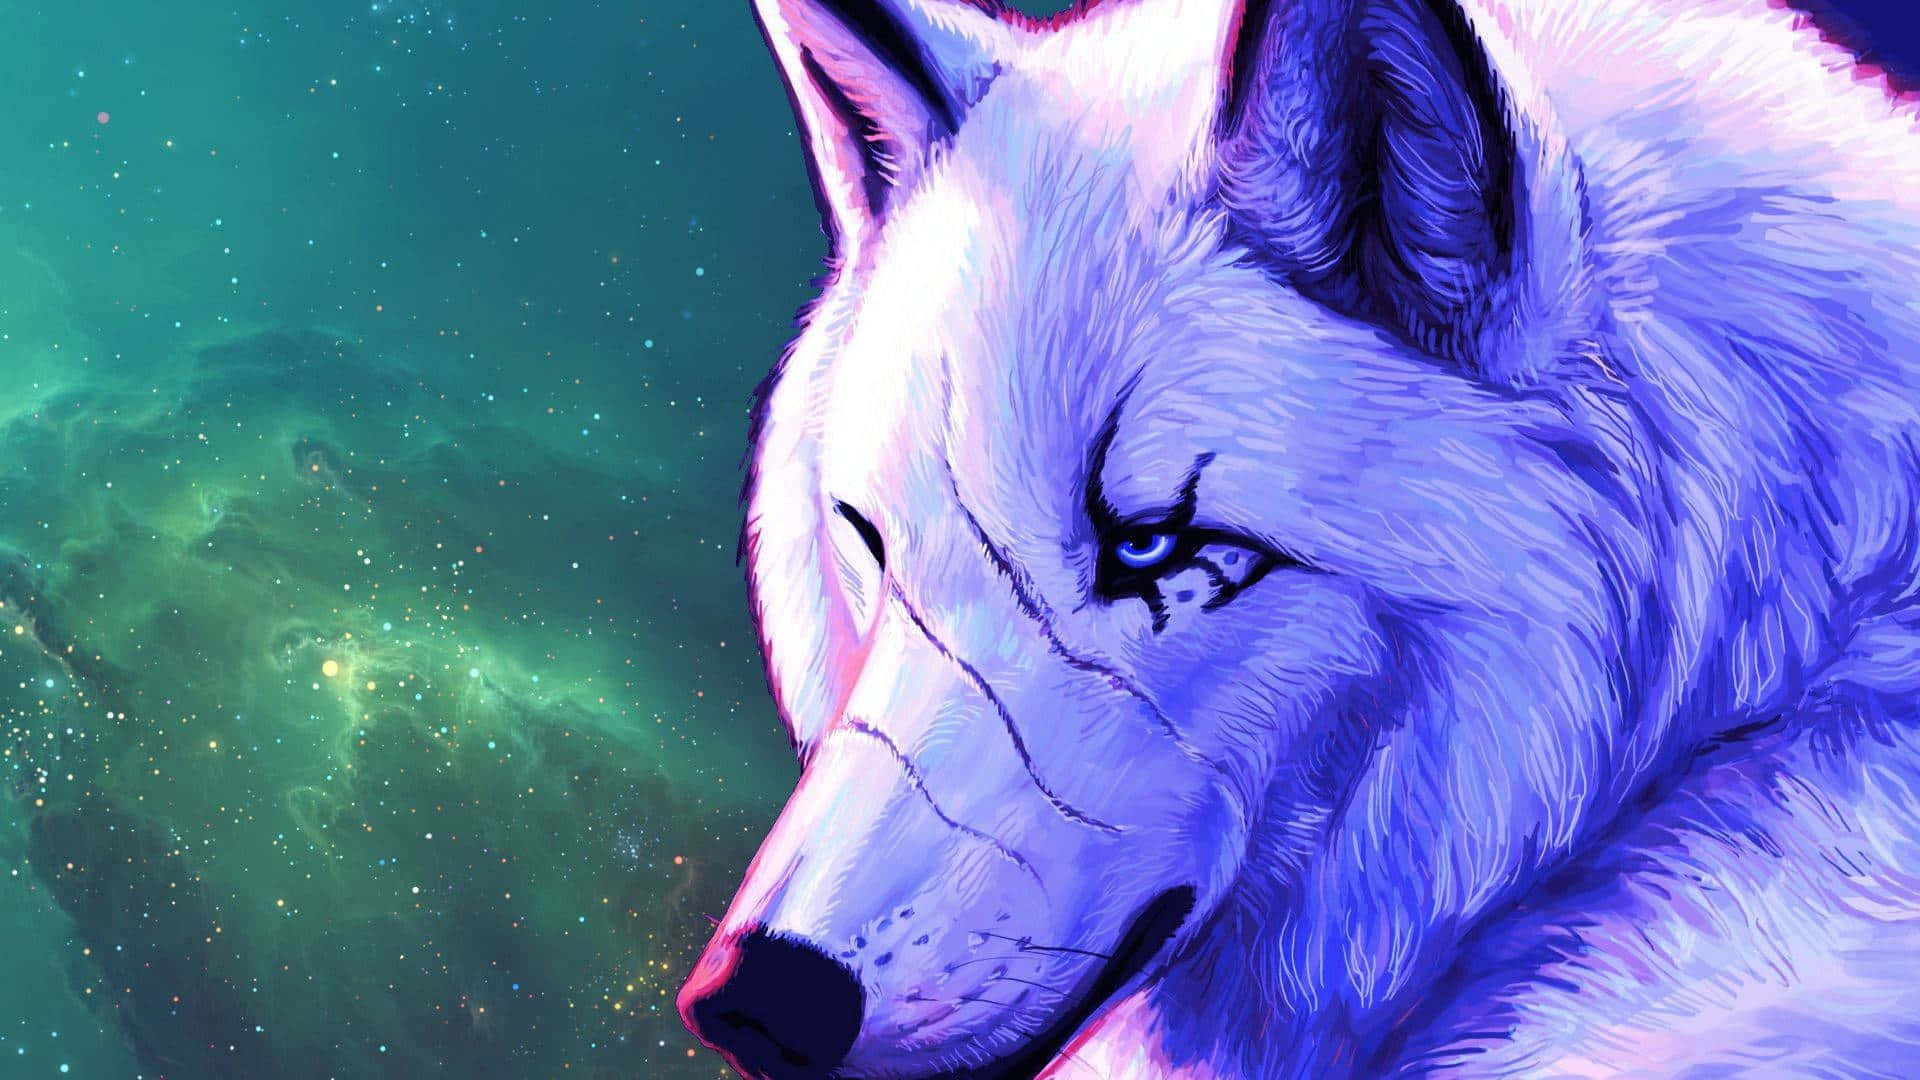 Witness the beauty of the majestic Galaxy Wolf